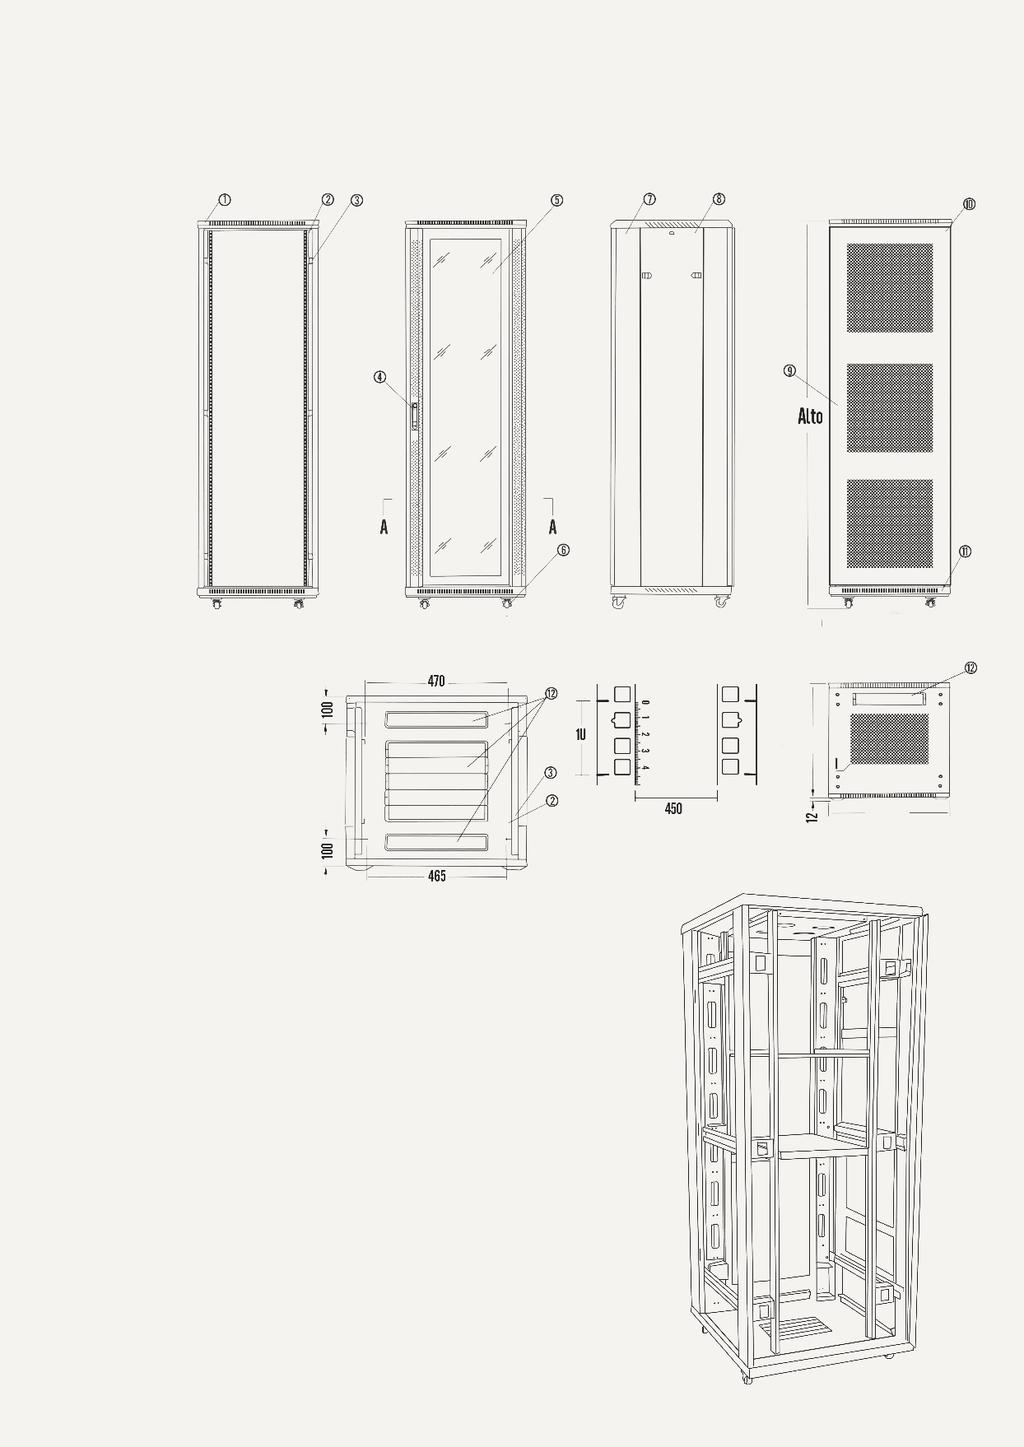 20CATALOGUE 14PRODUCT NO FRONT DOOR FRONT SIDE REAR BACKGROUND WIDTH TOP Floor Cabinets BOTTOM 1. Top cover. 2. Installation Guide numbered accessories. 3. Crossmember support of the numbered guides.